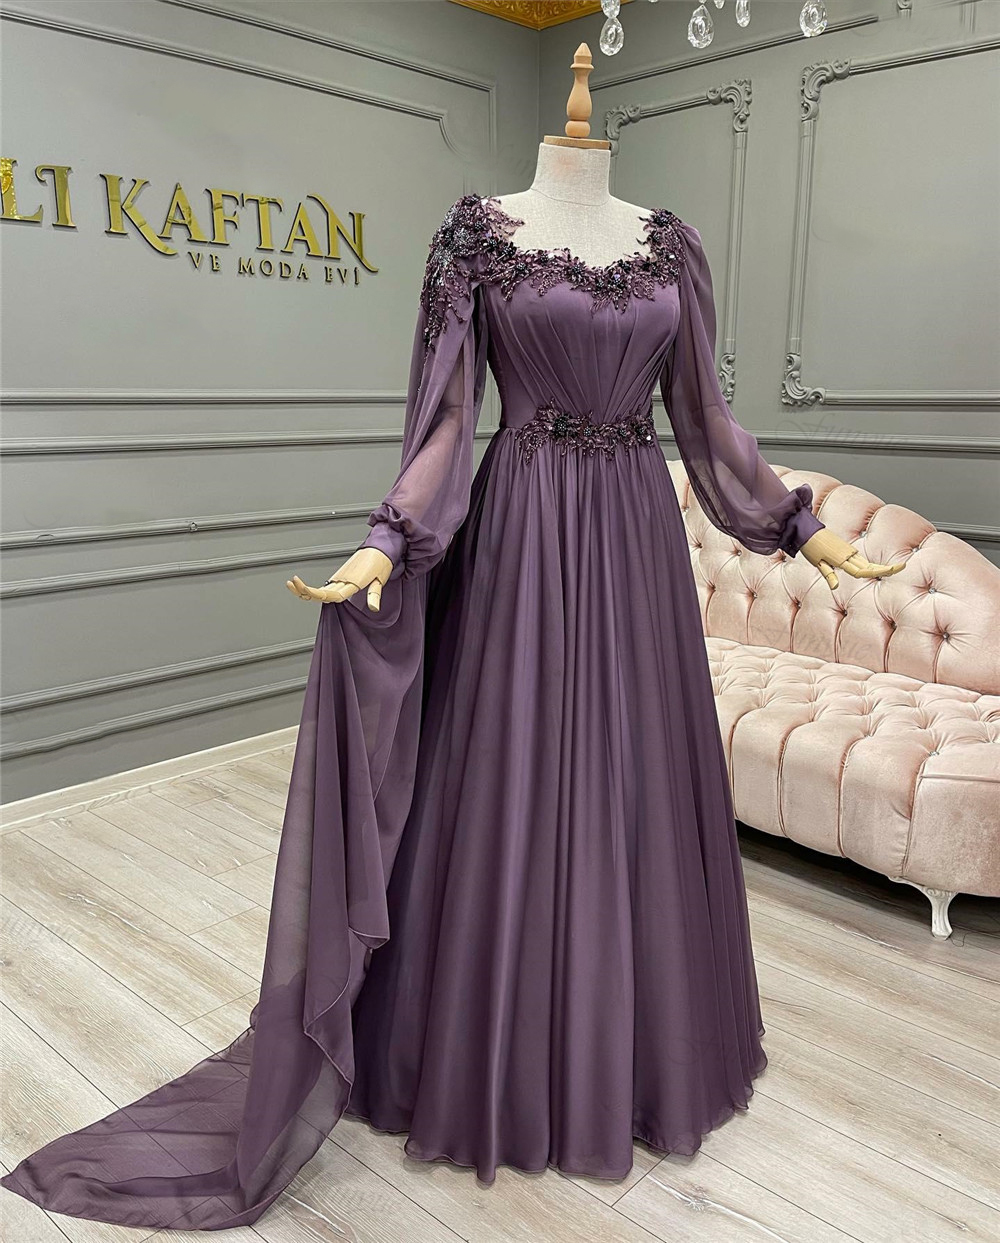 Abendkleider Purple A-line Long Sleeve Formal Dress Lace Beaded Chiffon Moroccan Caftan Muslim Evening Prom Gowns